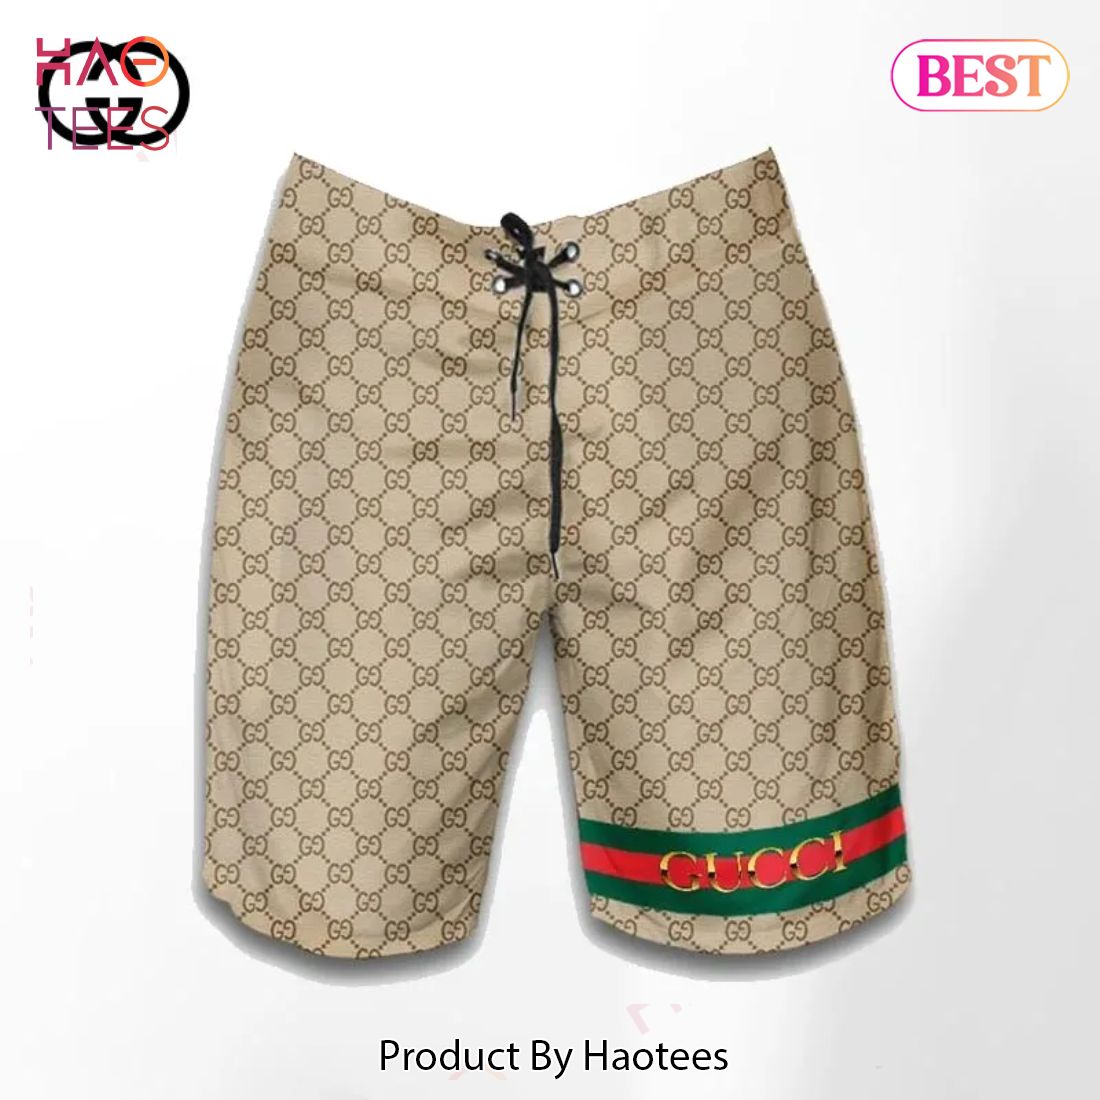 NEW FASHION] Louis Vuitton New LV 3D Luxury All Over Print Shorts Pants For  Men